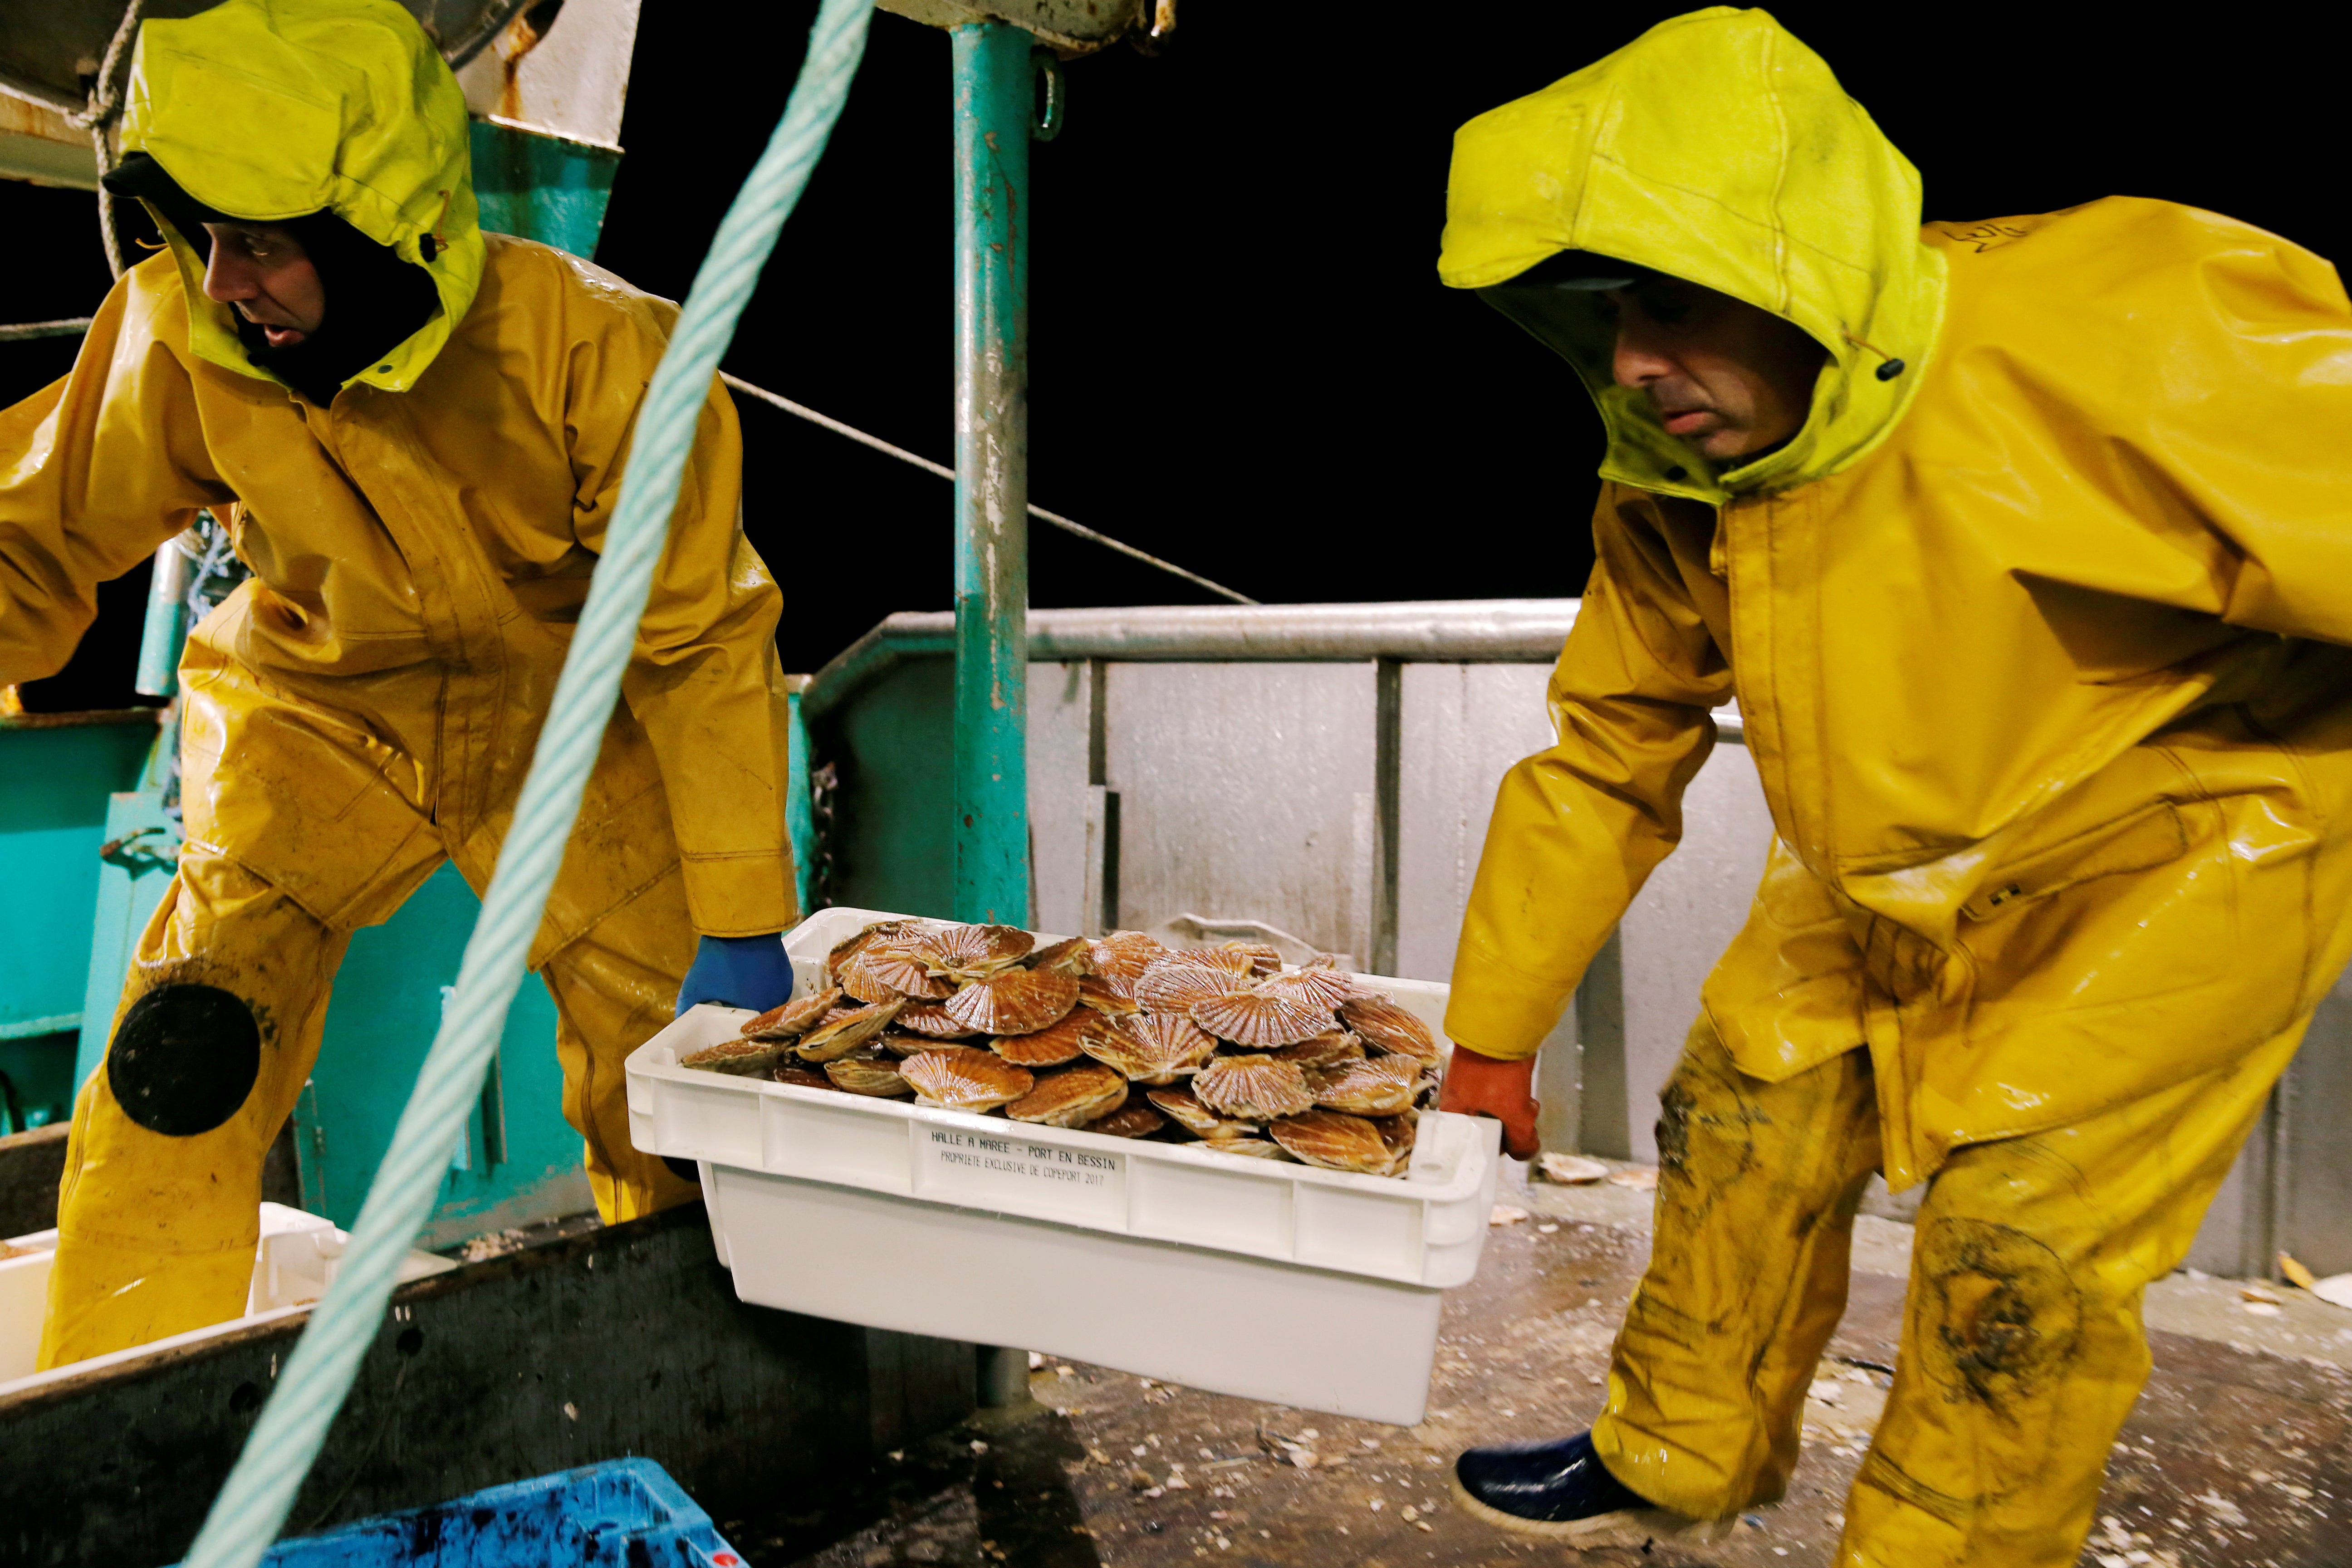 Fishermen carry a box of scallops on-board a trawler off the French coast on 1 October, 2018.